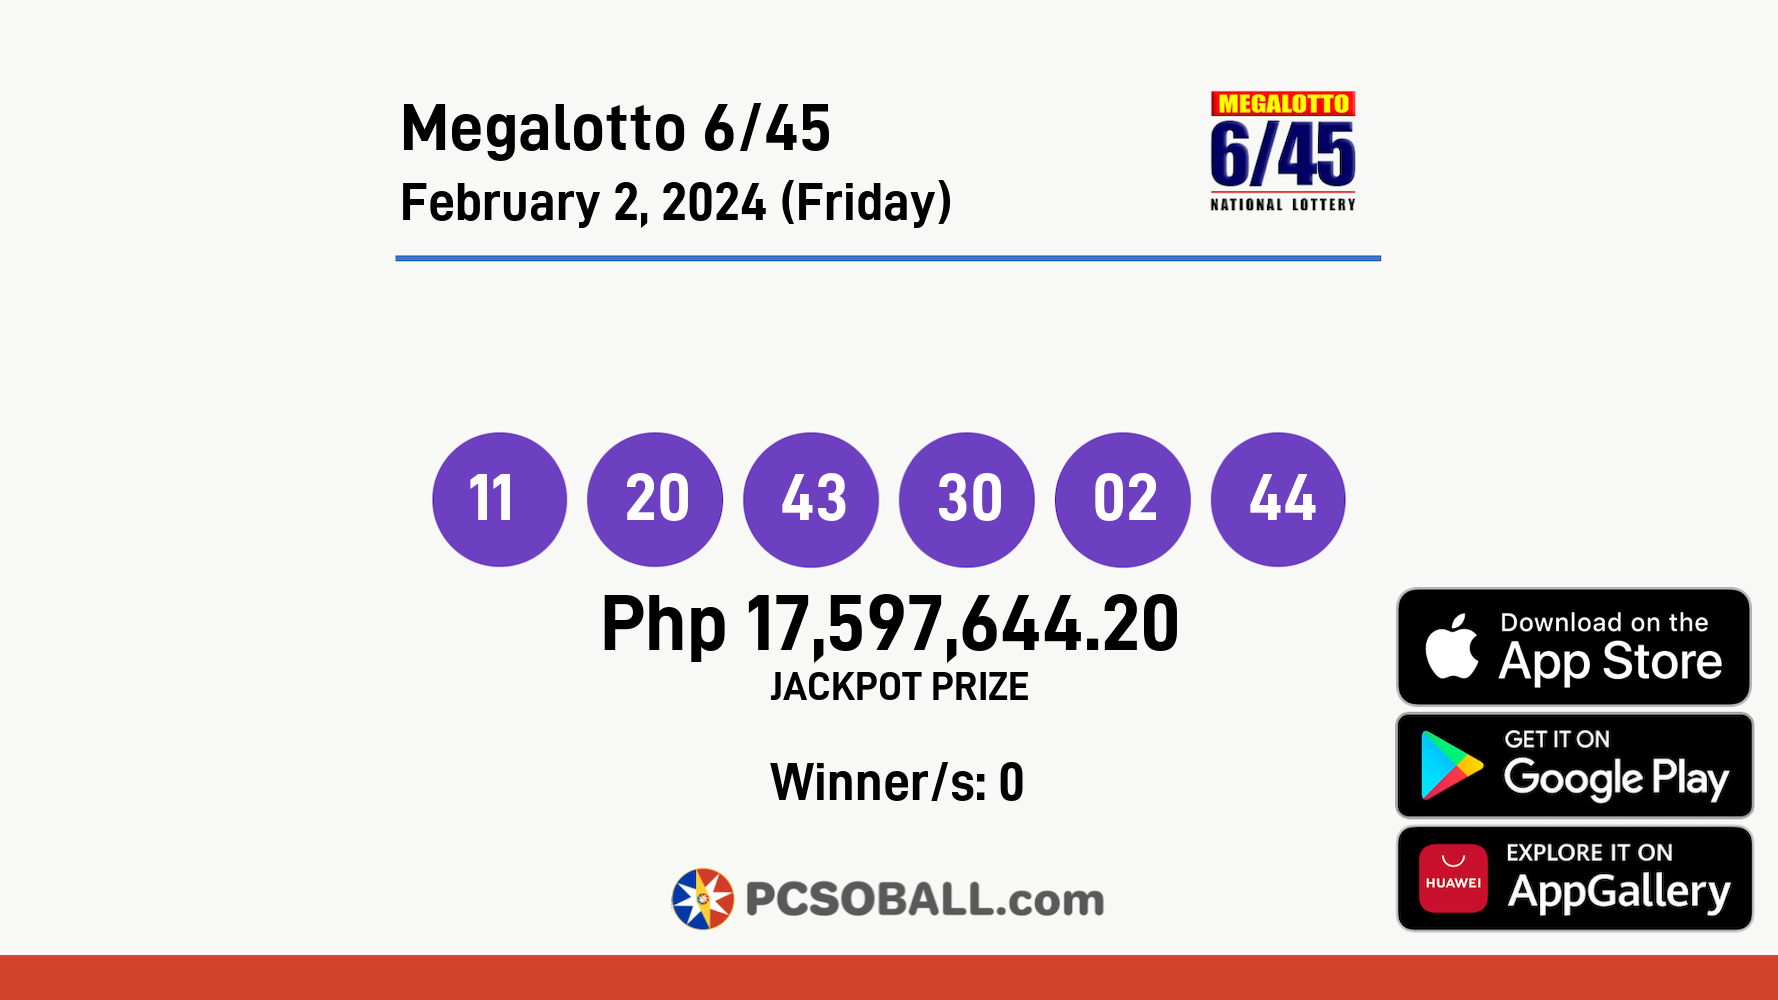 Megalotto 6/45 February 2, 2024 (Friday) Result